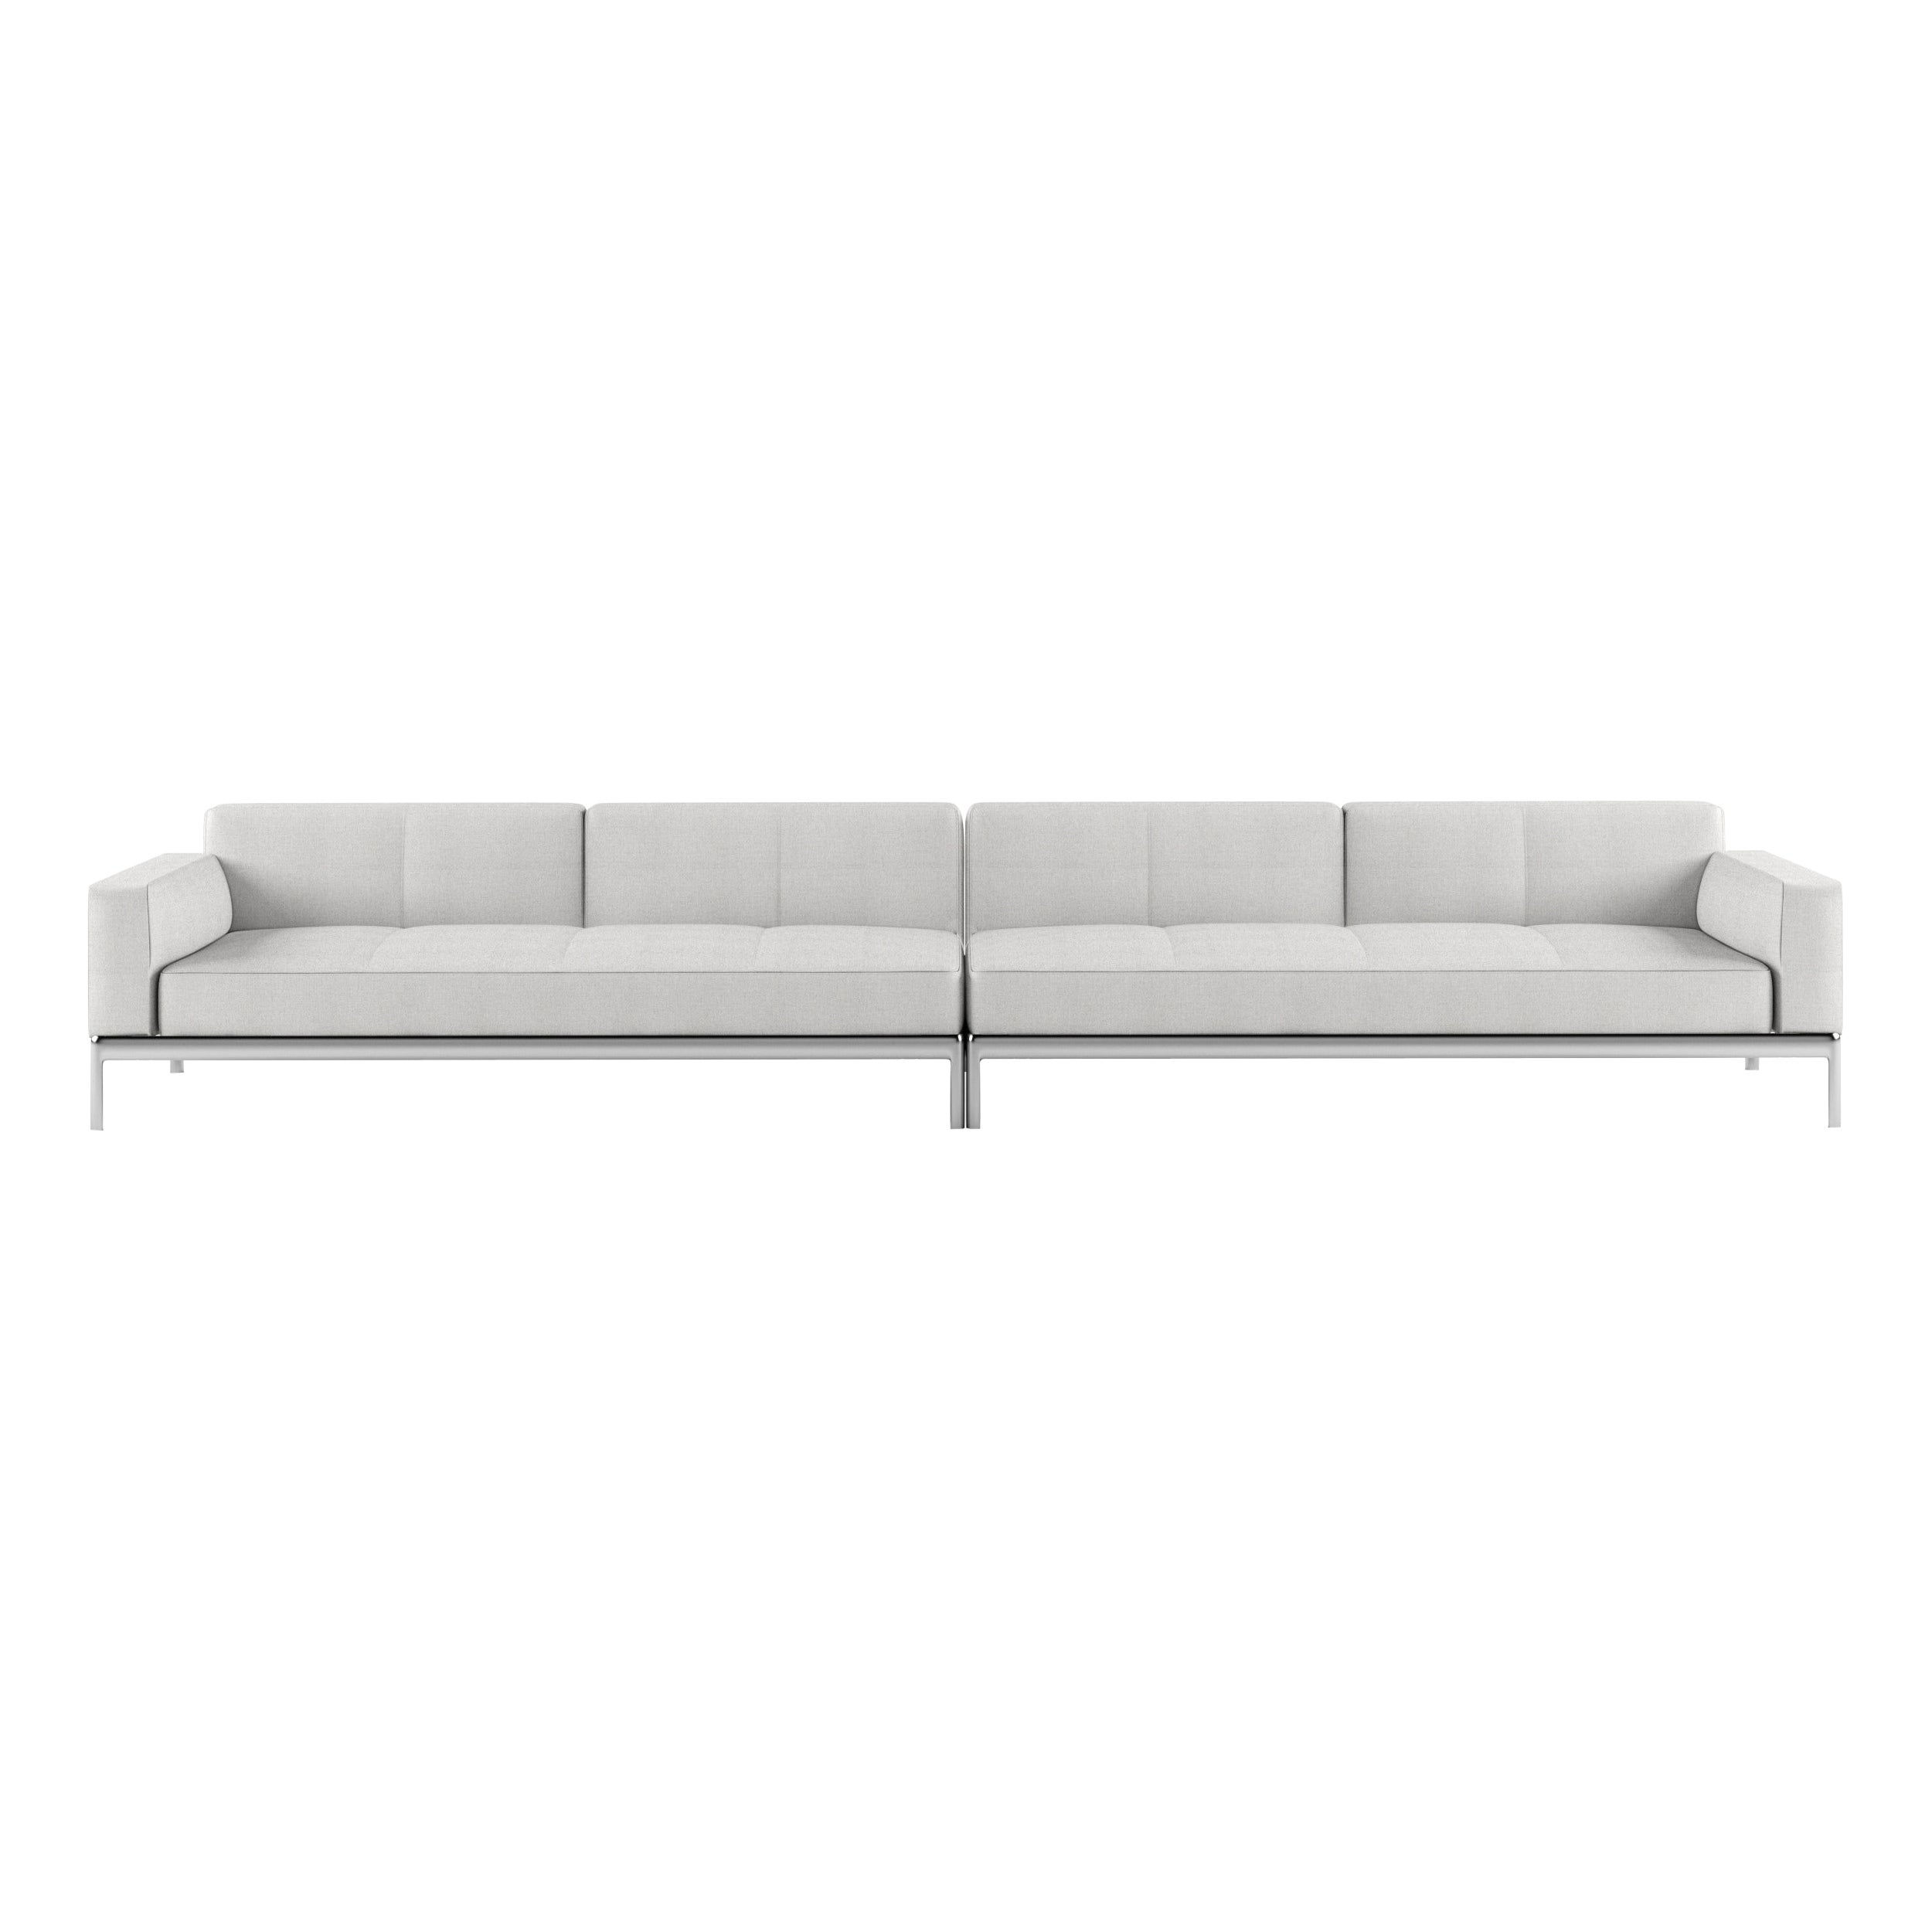 Alias P06 AluZen Sectional Sofa in Upholstery with Polished Aluminium Frame For Sale